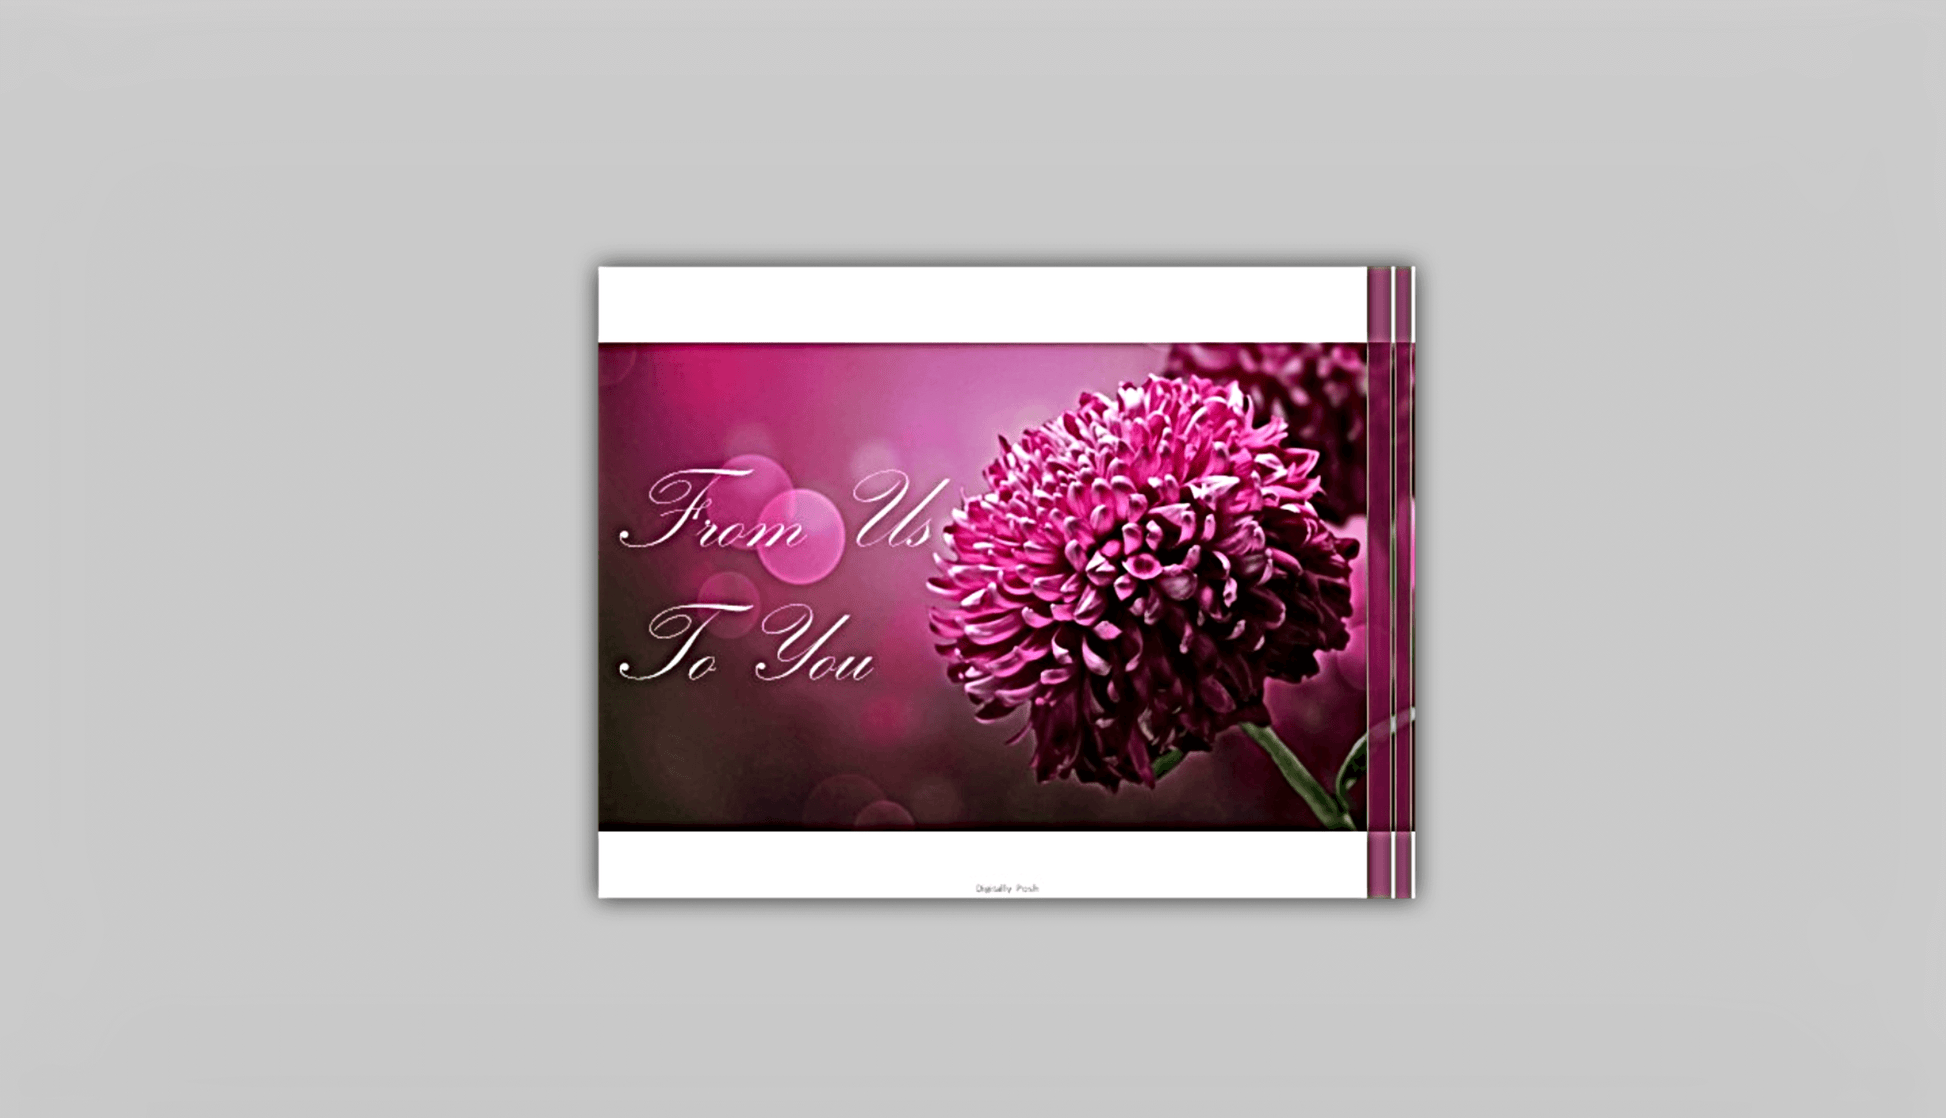 Personalized Note Card: Add a Personal Touch with Customized Stationery for Every Occasion. Both Of Us Notecard